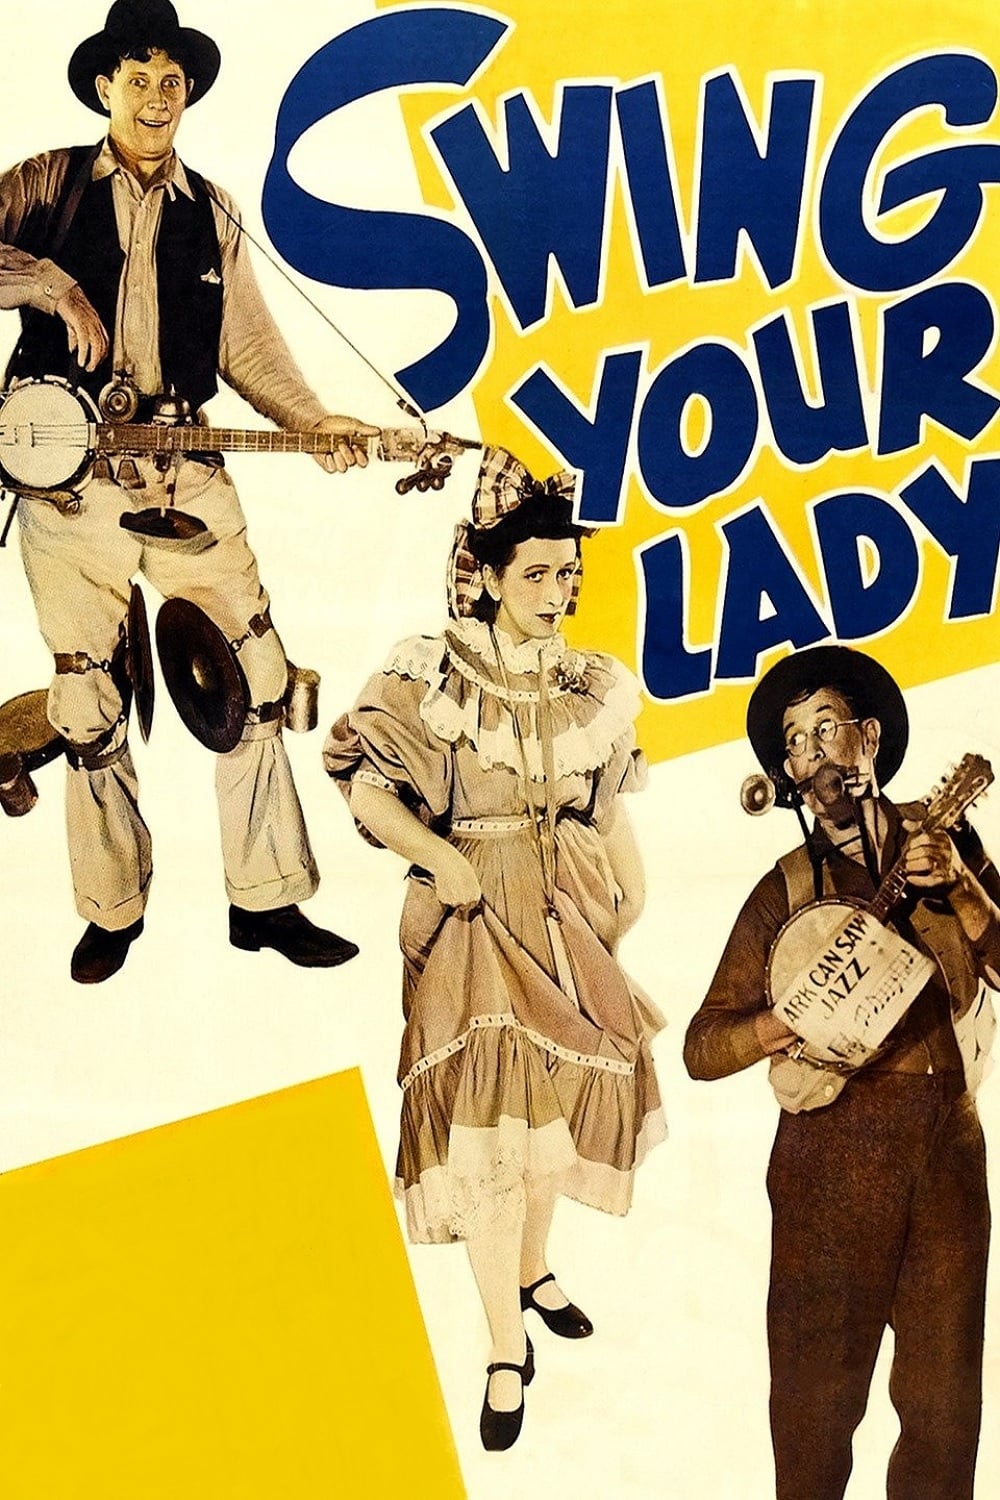 Swing Your Lady (1938)